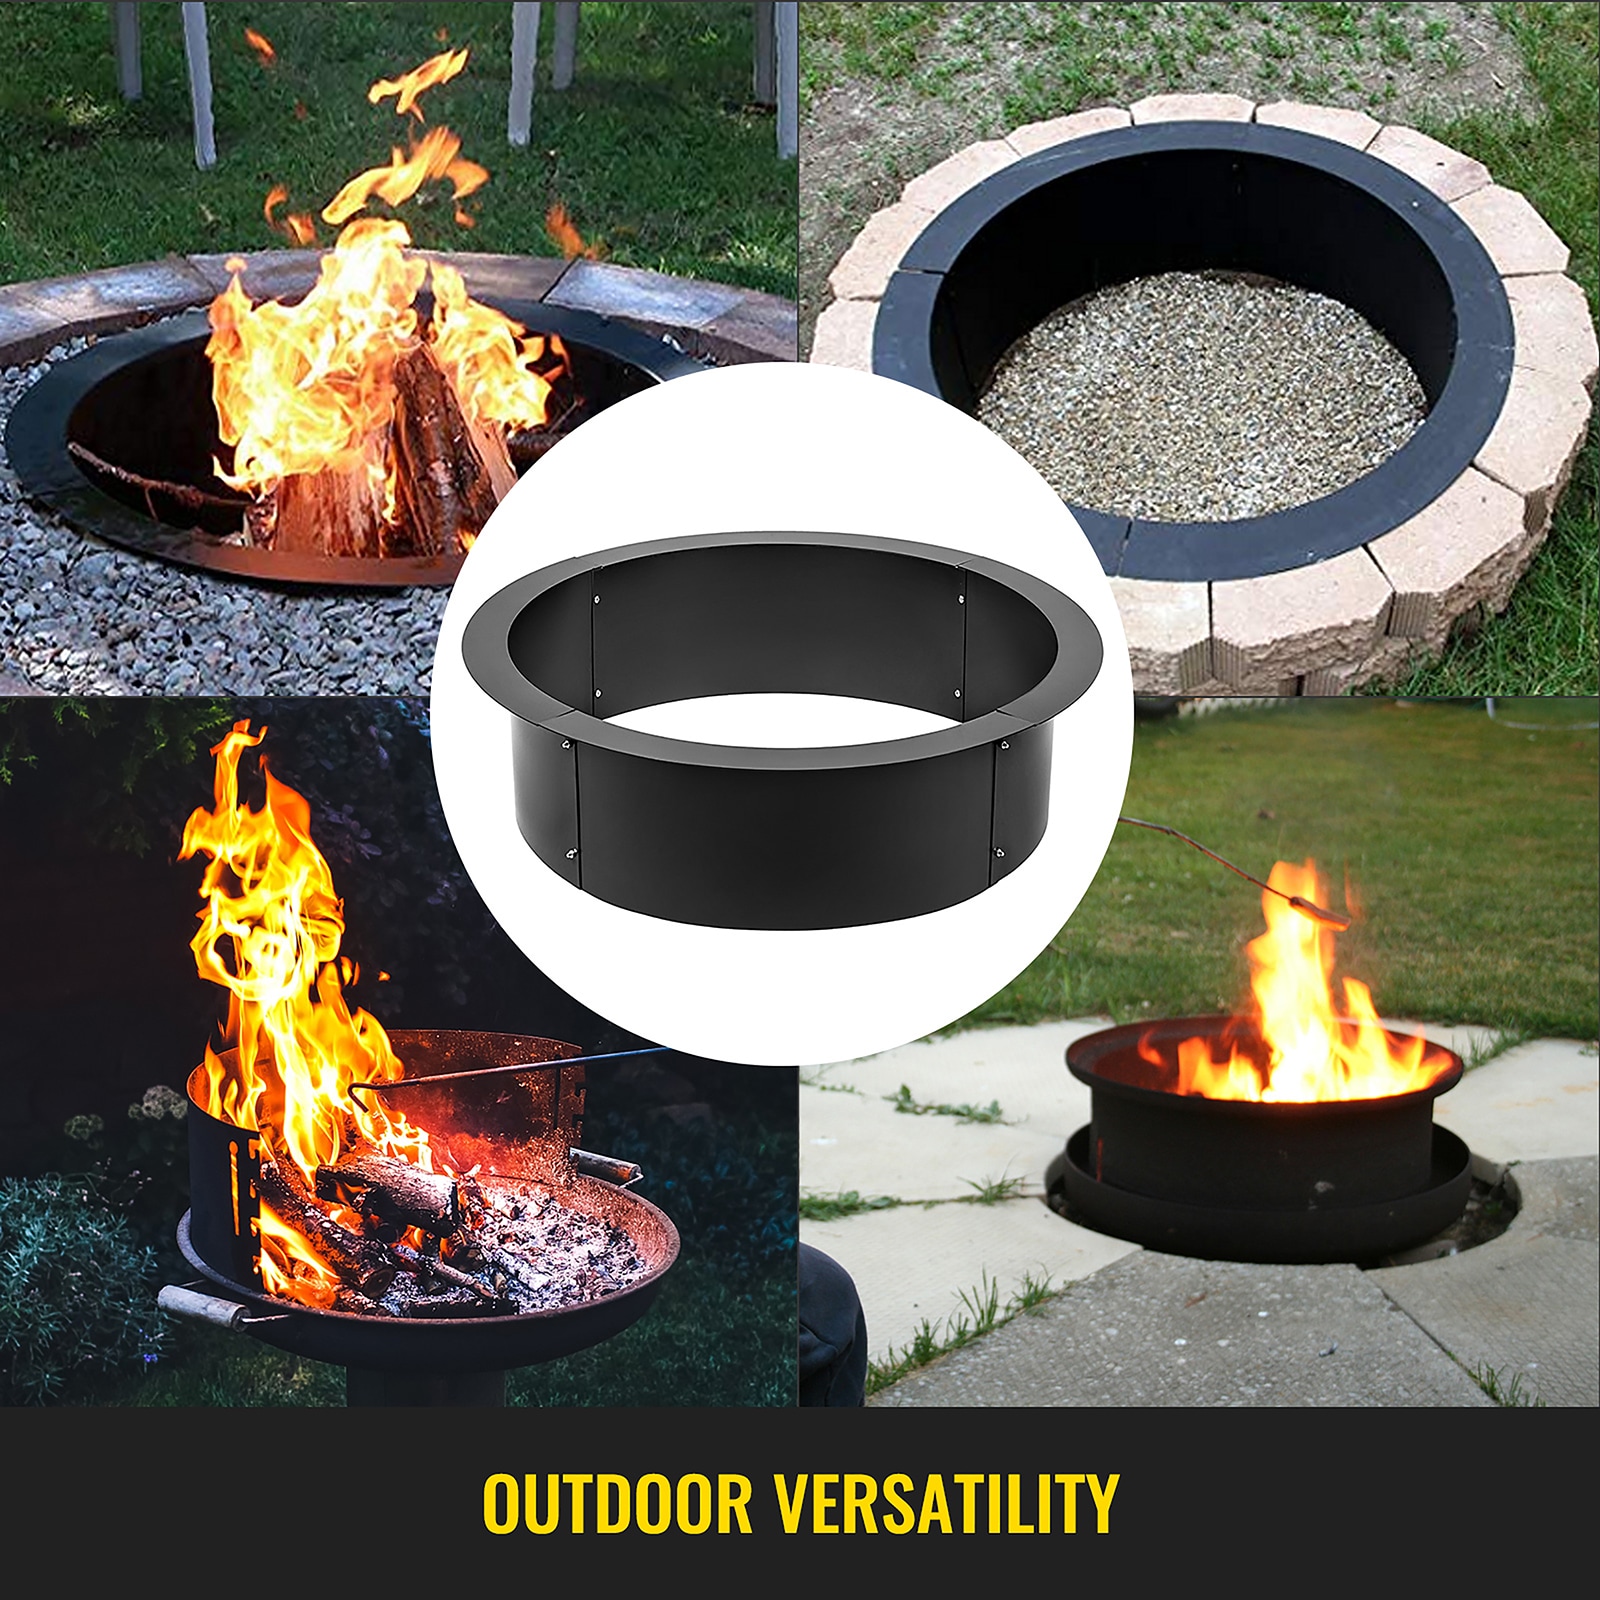 How to Maintain Stainless Steel Fire Pits - Majestic Fountains and More